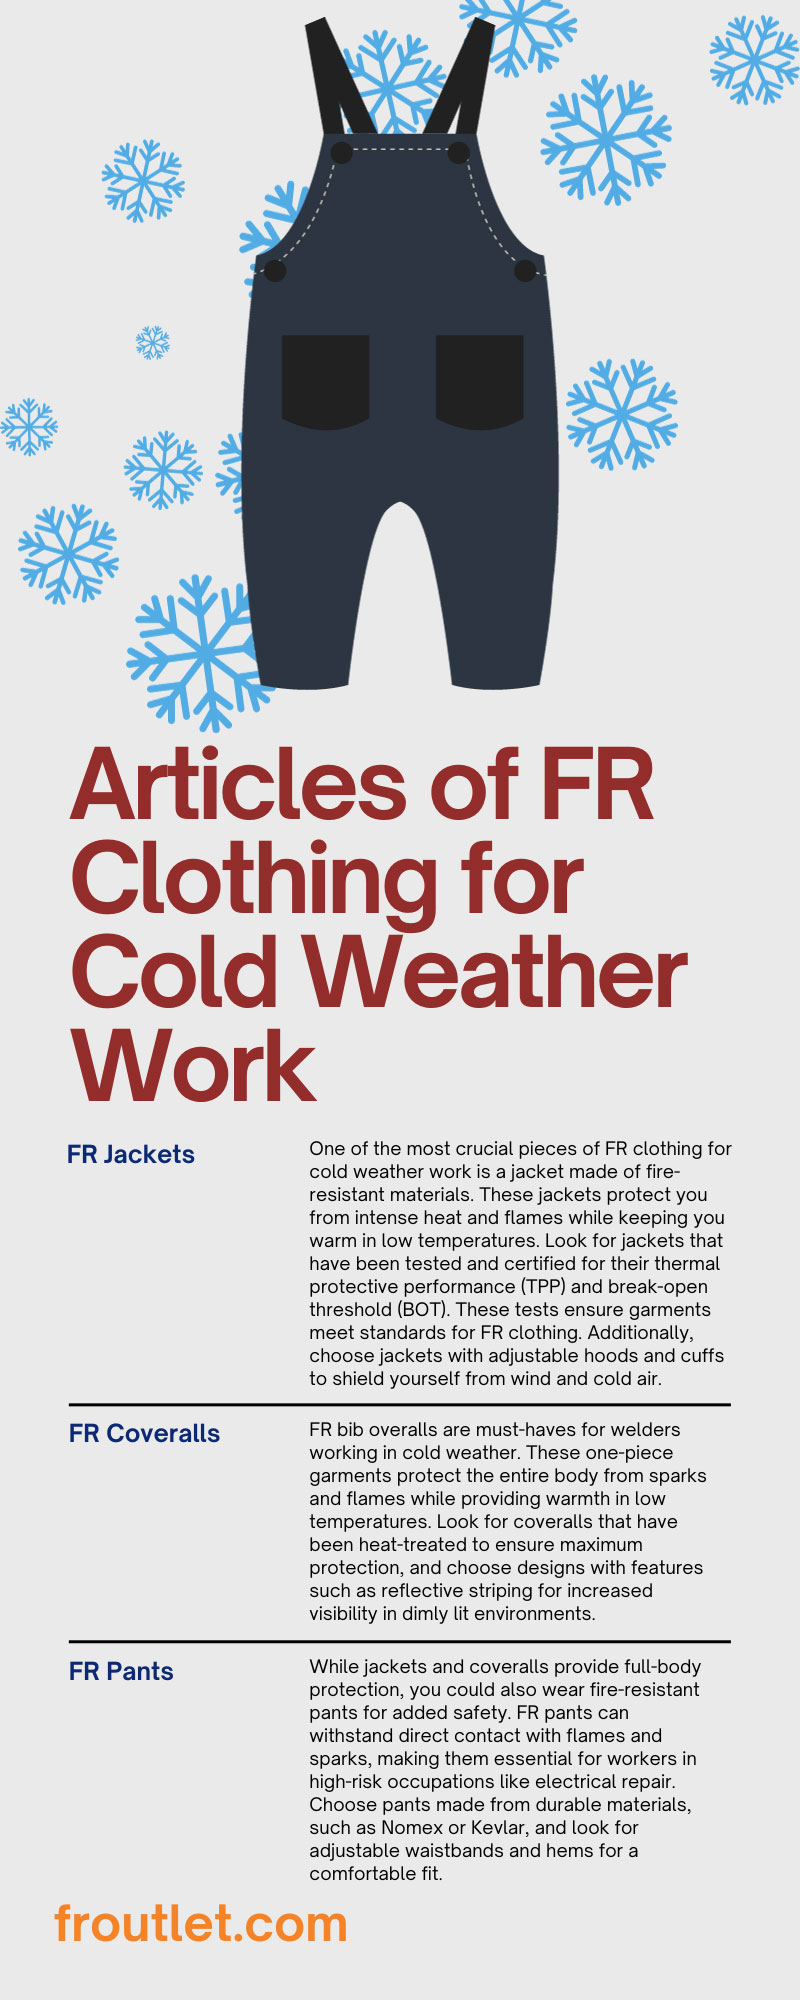 10 Articles of FR Clothing for Cold Weather Work